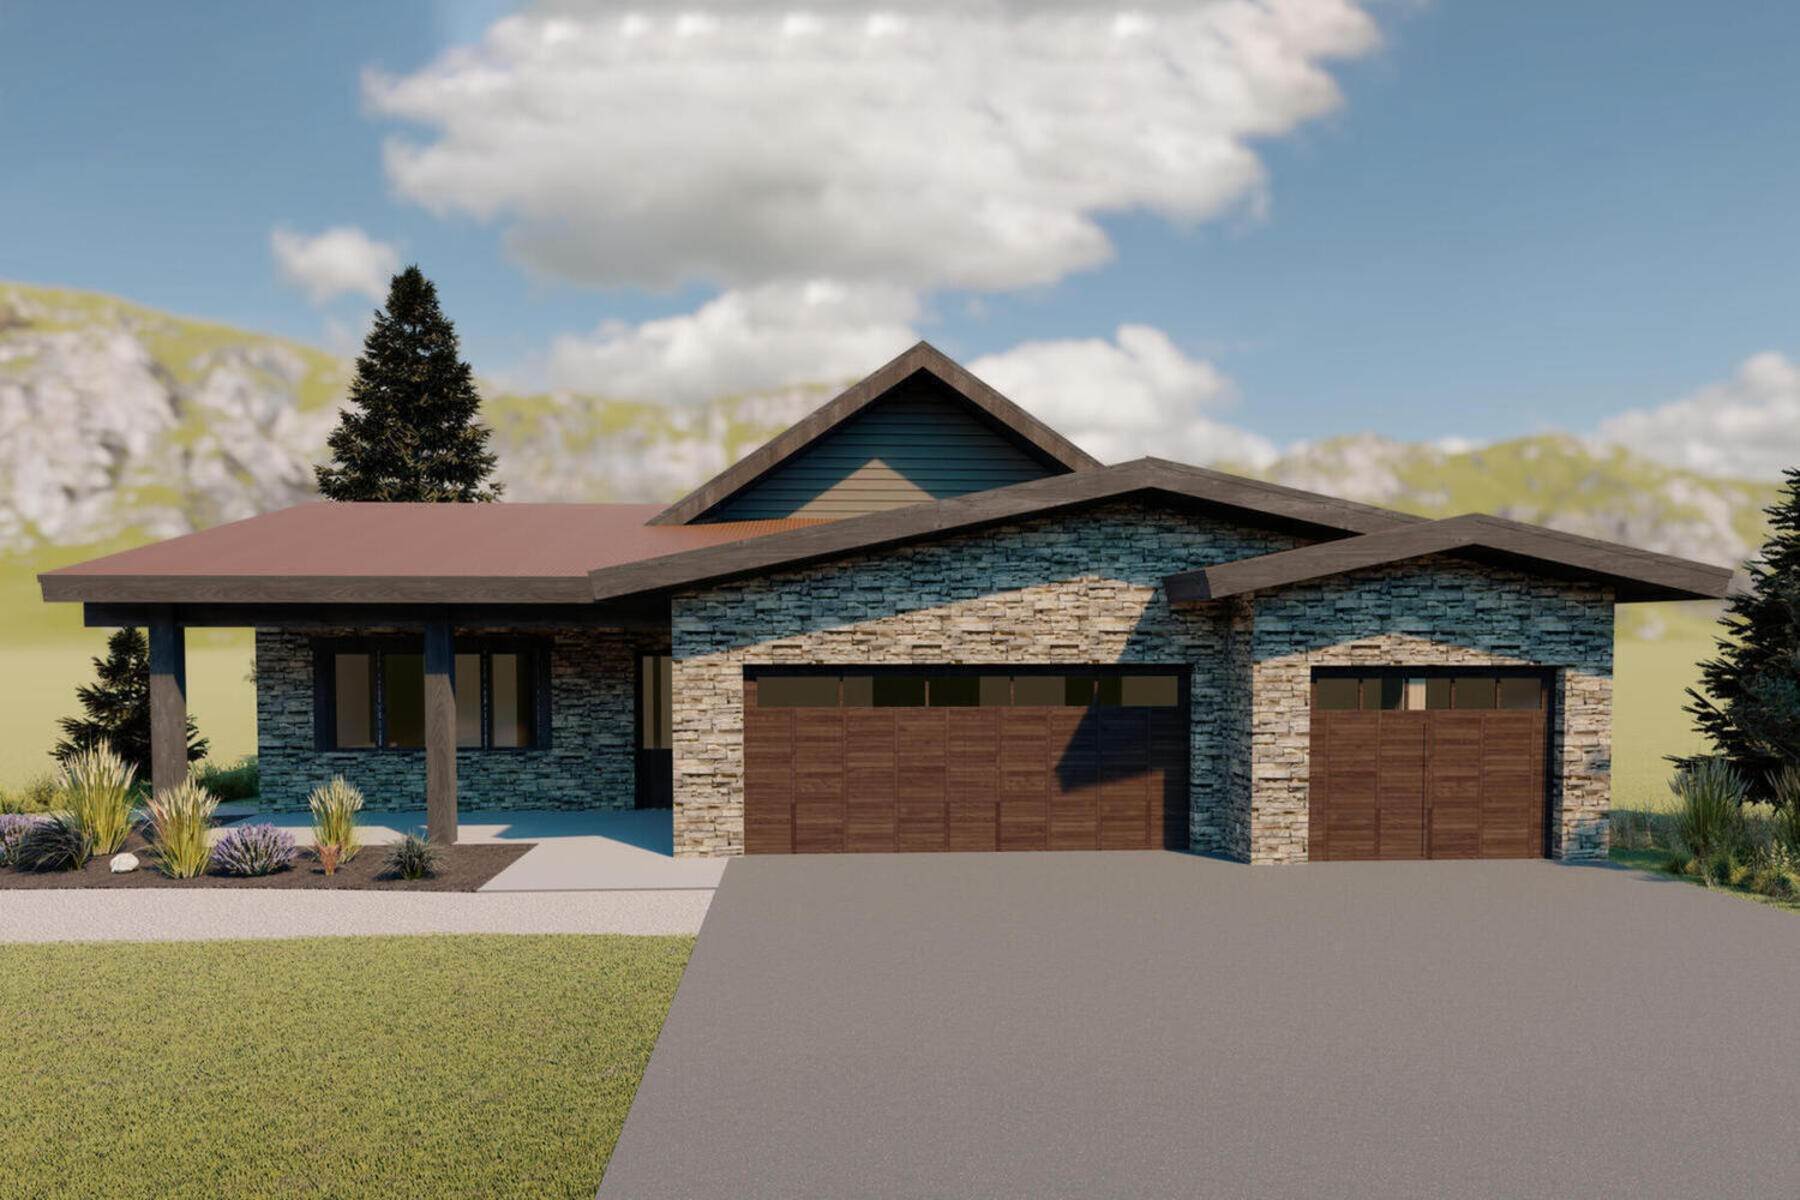 Single Family Homes for Sale at Summit Rambler At High Star Ranch With 3 Car Garage And Expansive Views 272 Thorn Creek Drive, Lot 12 Kamas, Utah 84036 United States